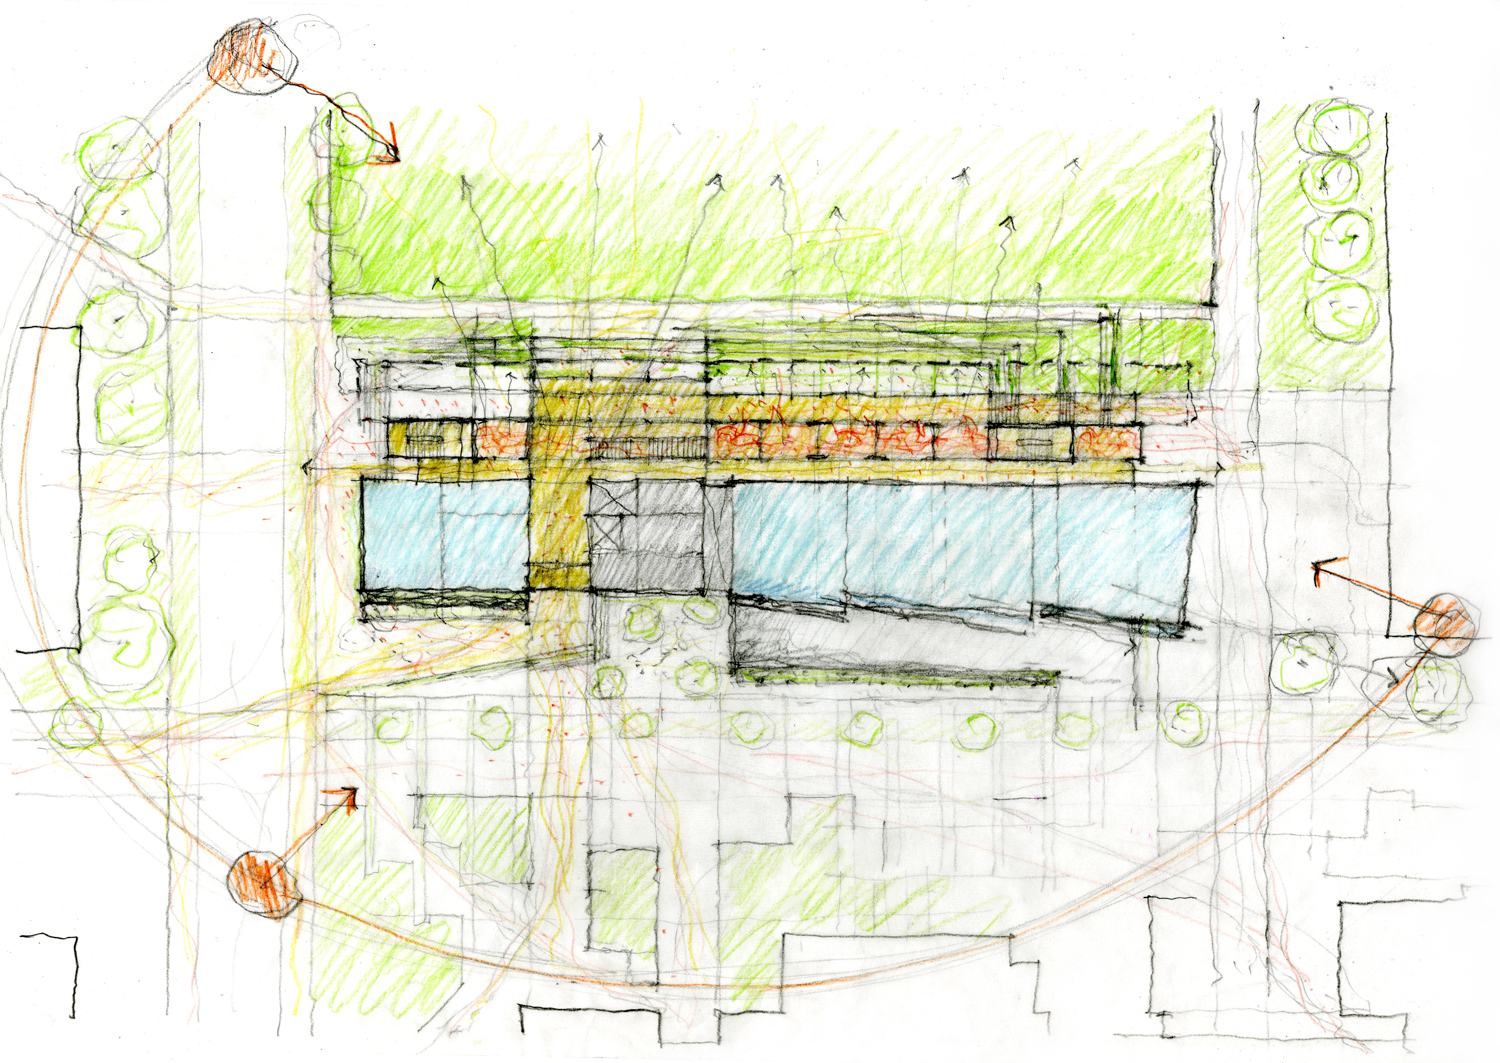  Concept sketch showing programmatic organization and connection to landscape. The CoorsTek Center for Applied Sciences, Colorado School of Mines in Golden, Colorado. Completed while working for Bohlin Cywinski Jackson. 